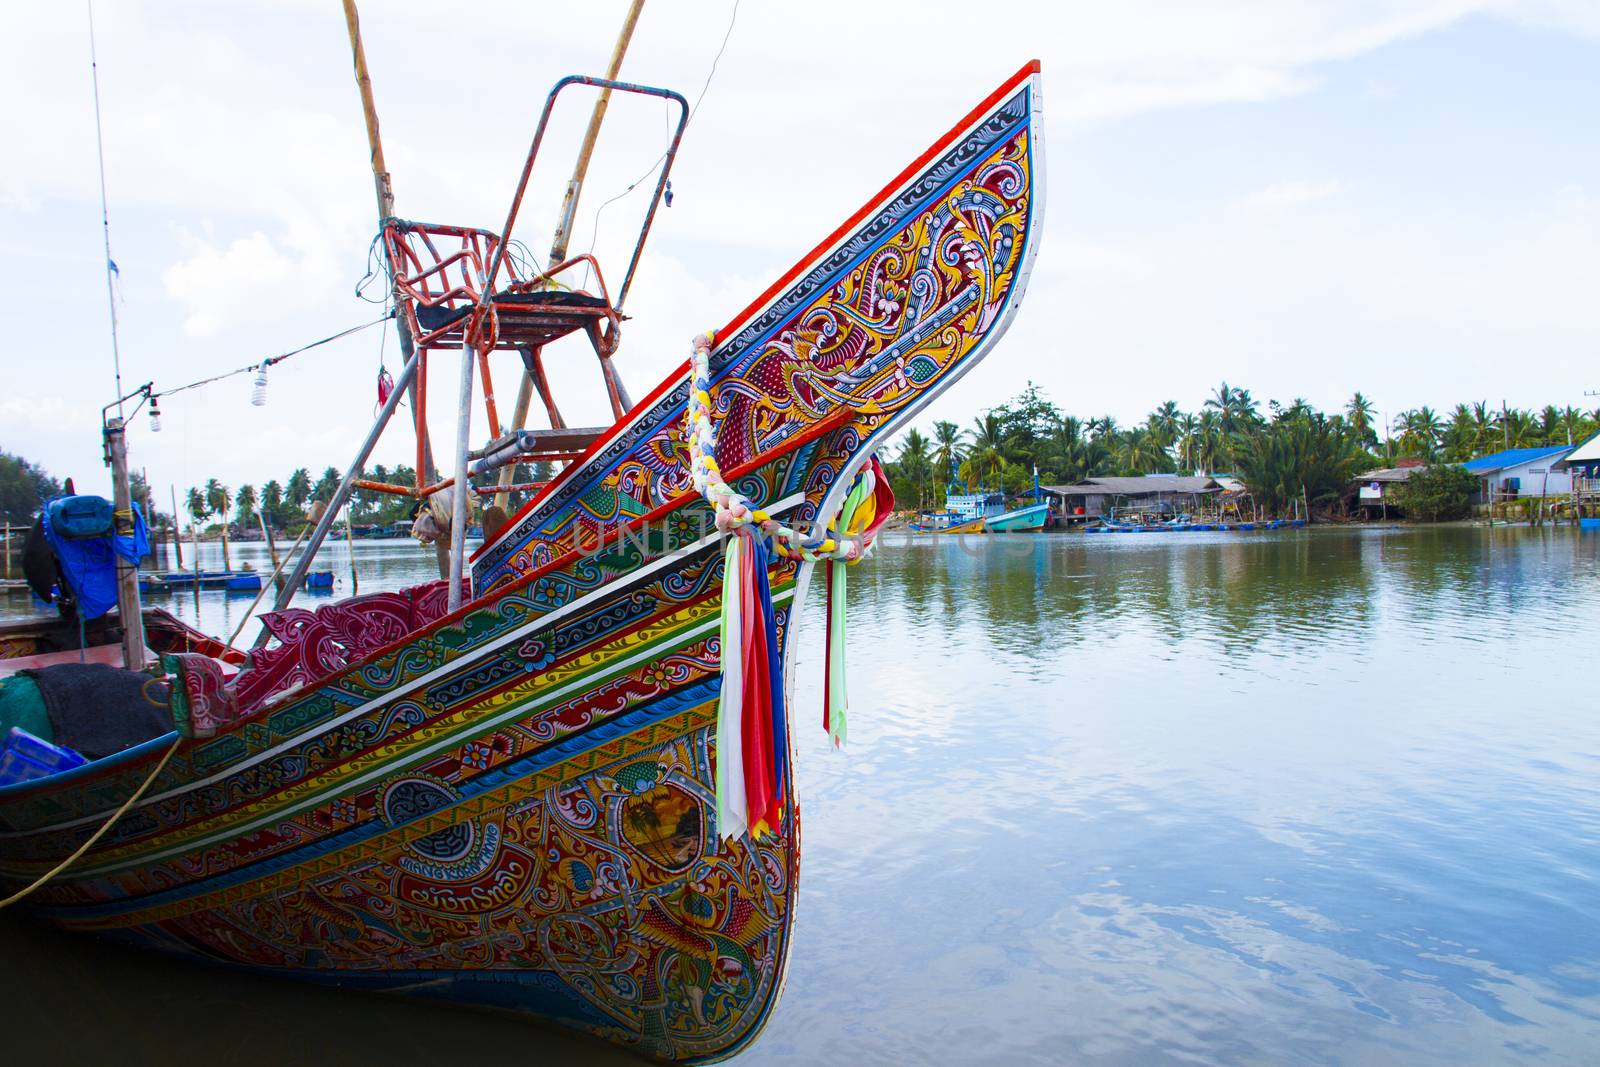 A Kolae boat  is a traditional fishing boat used in the lower southern provinces of Thailand.